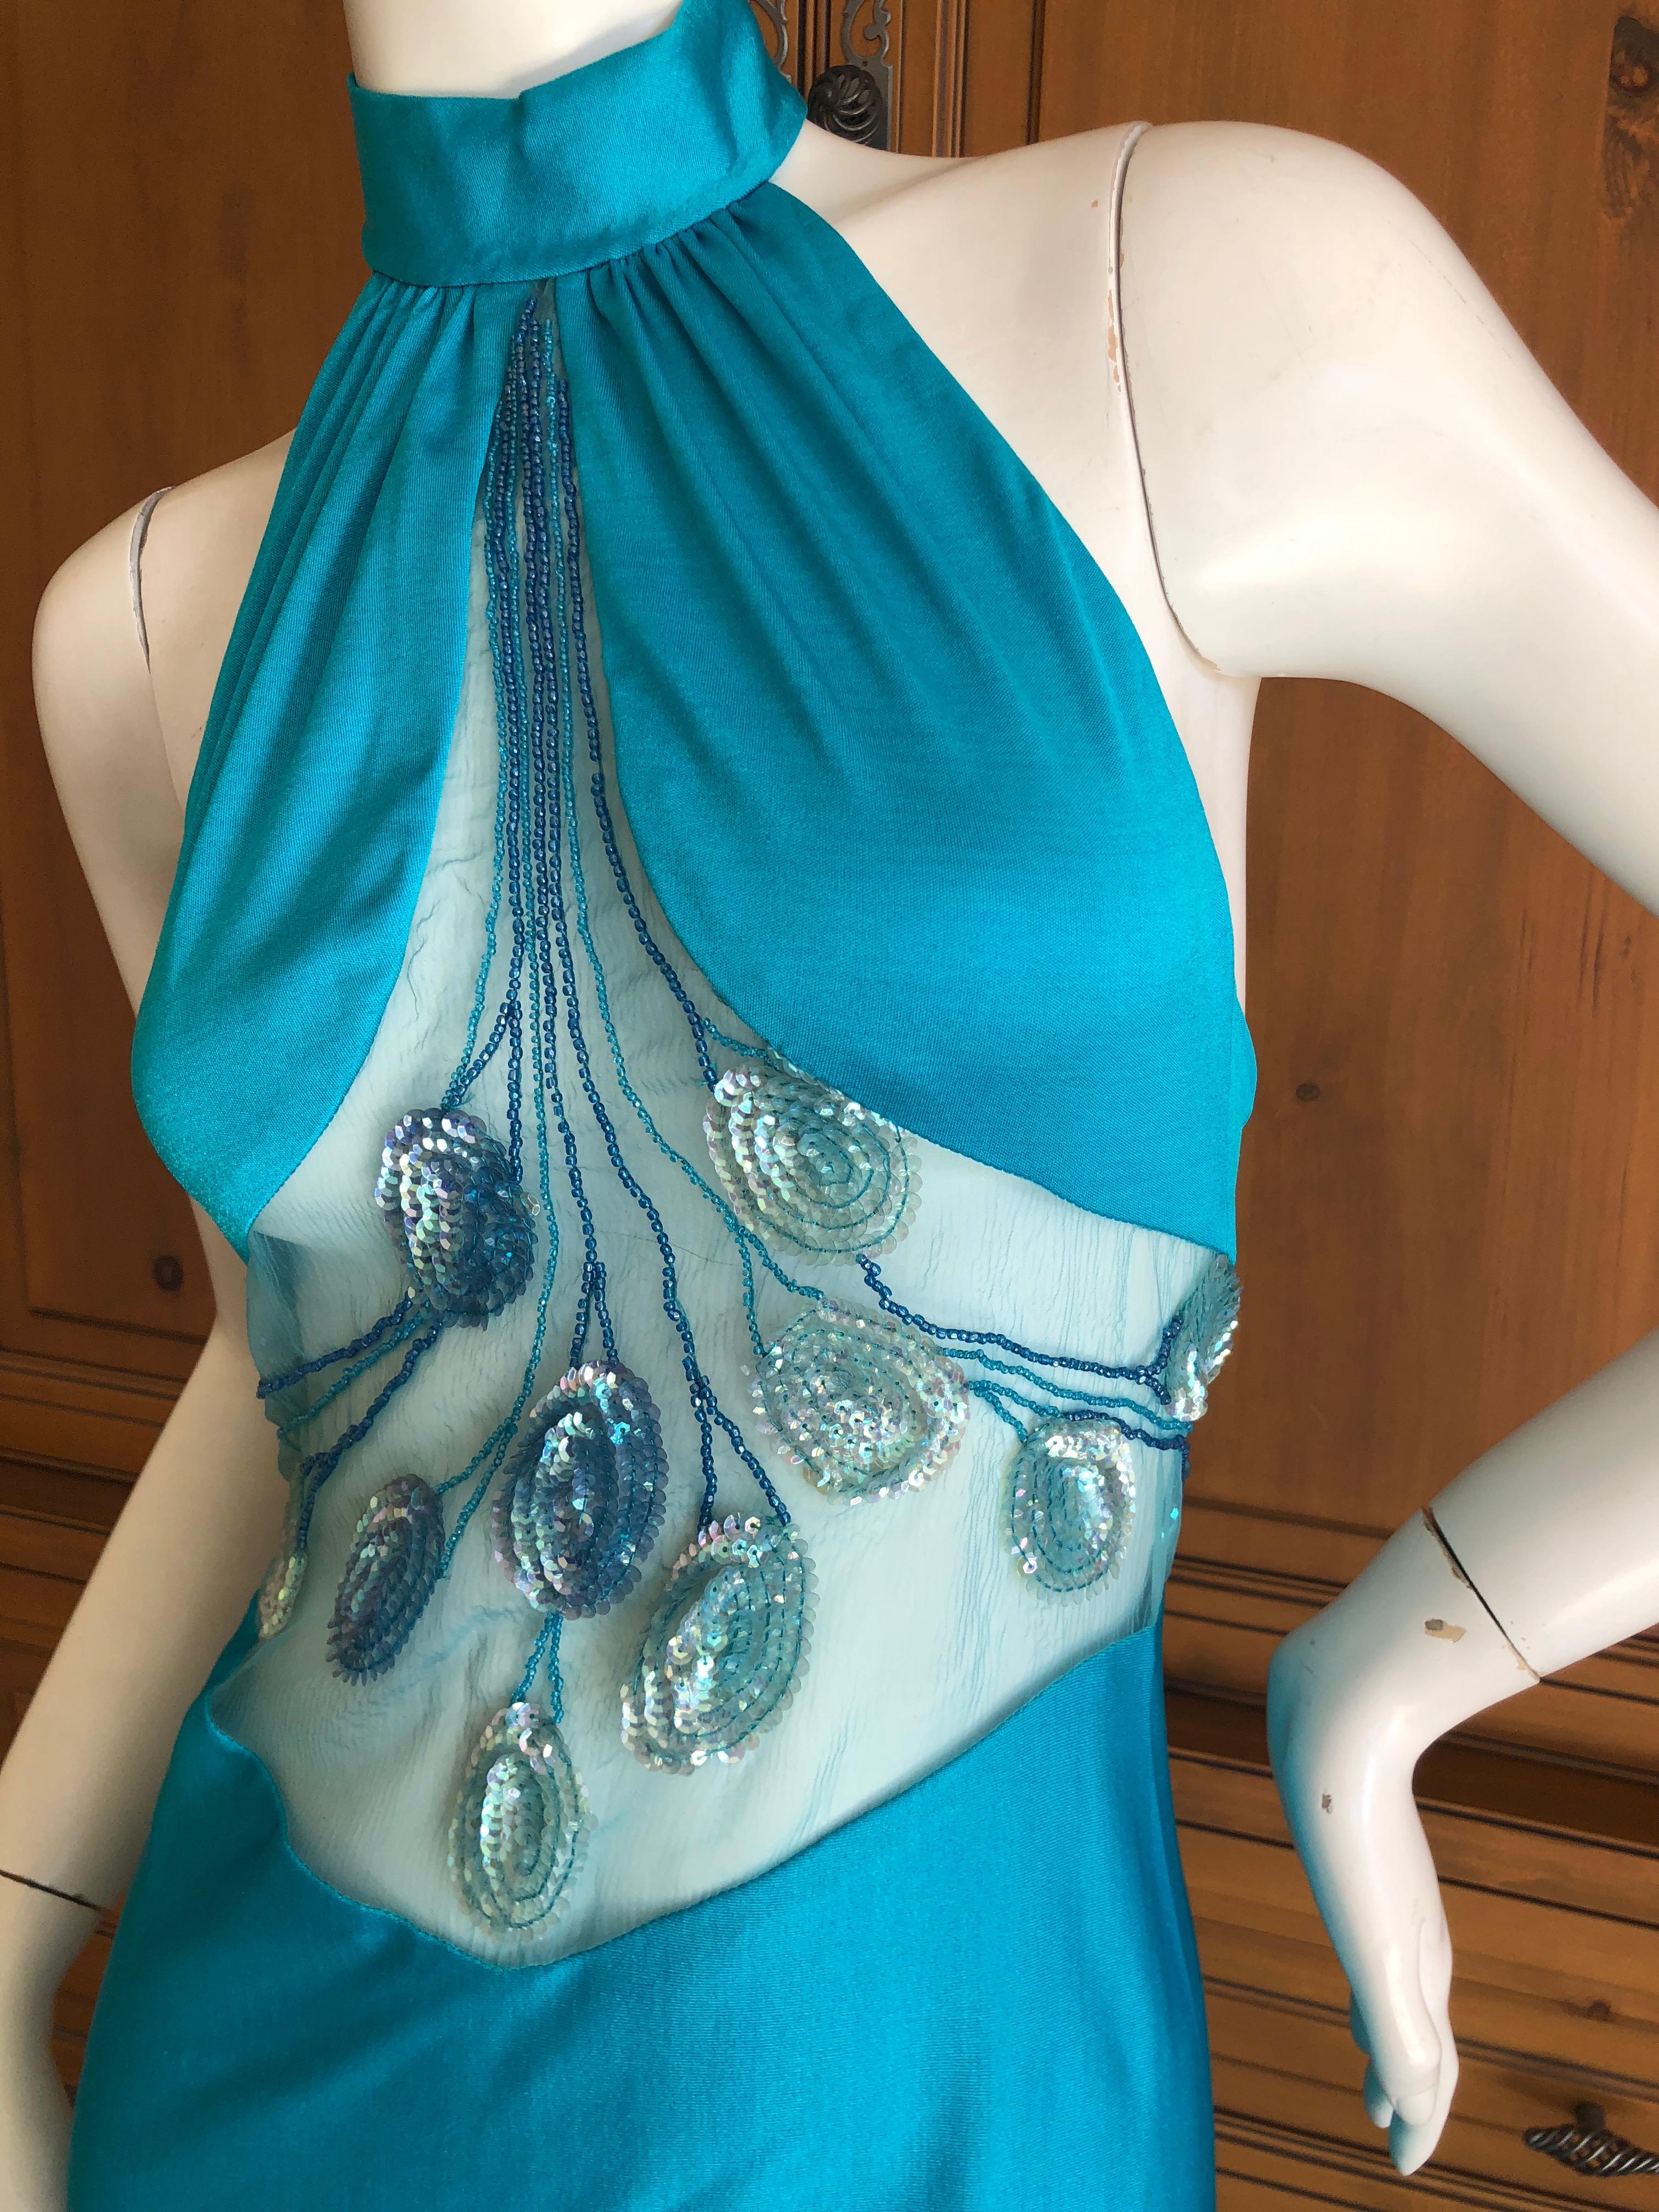 Loris Azzaro Couture 1970s Sheer Sequin Accented Turquoise Blue Dress and Cape 2